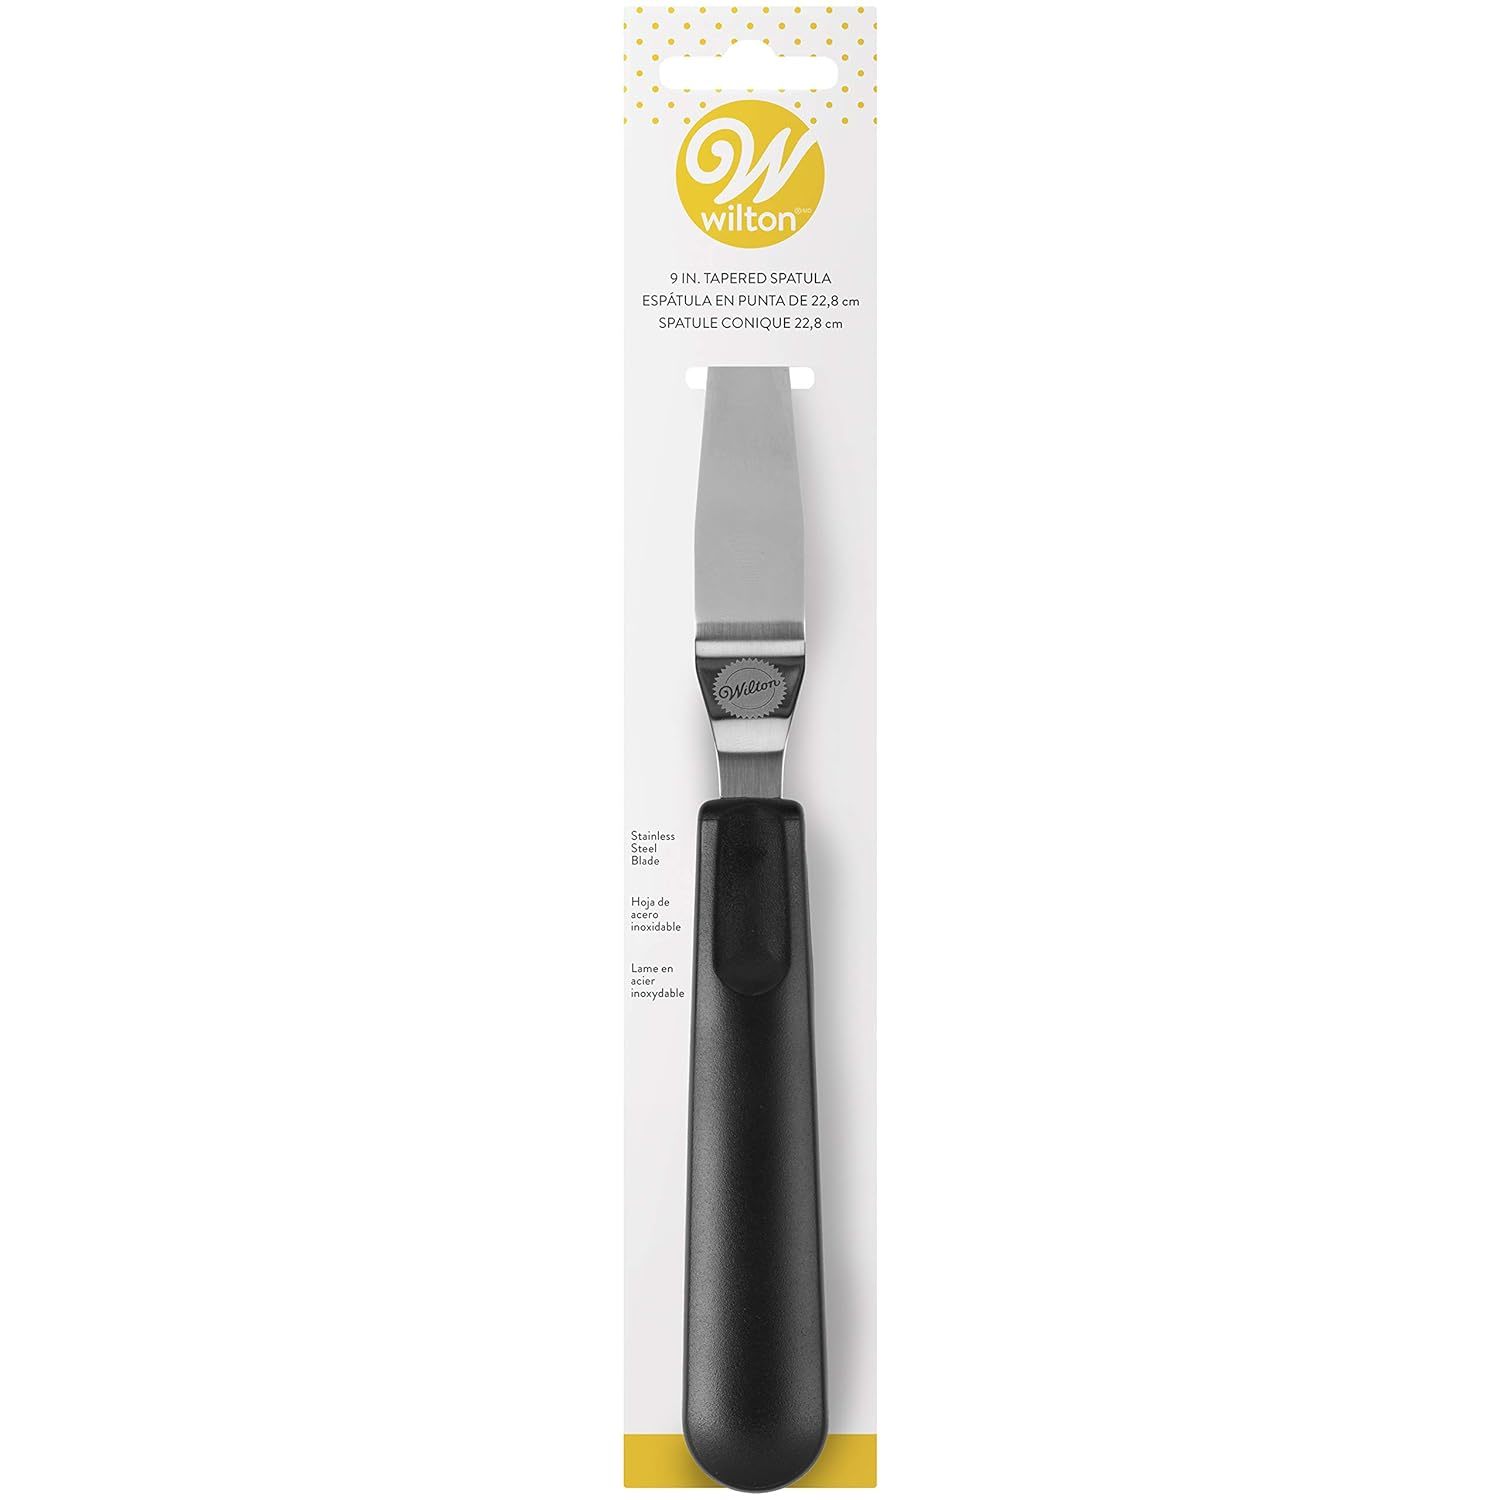 Wilton Tapered Icing Spatula, 9-Inch, Black - $14.99